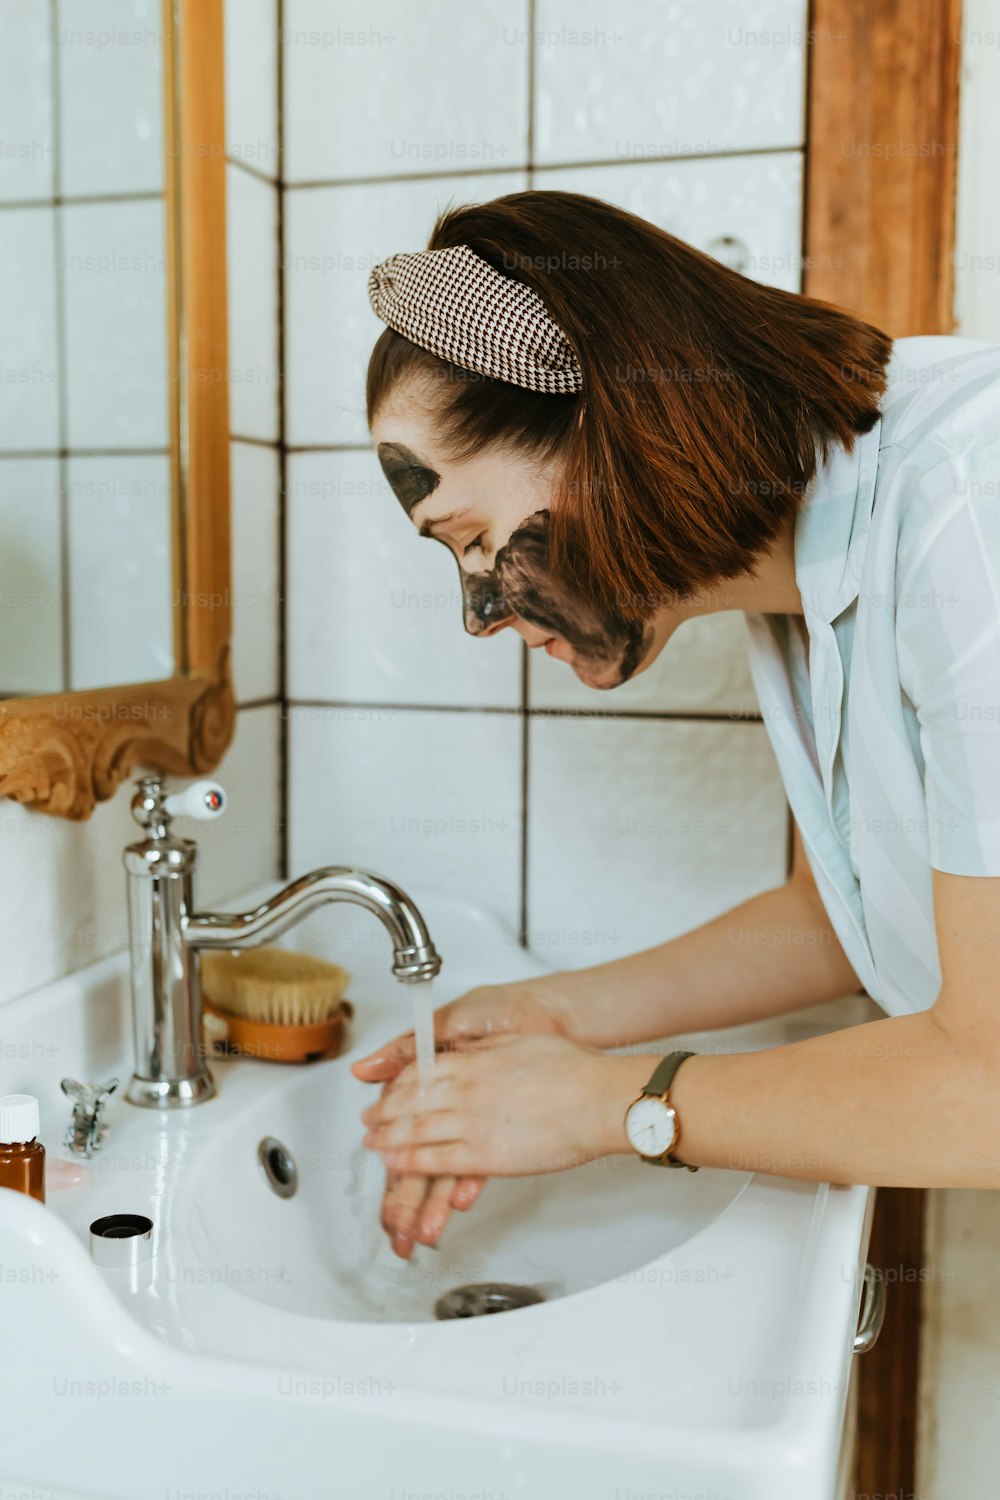 a woman washing her hands in a bathroom sink